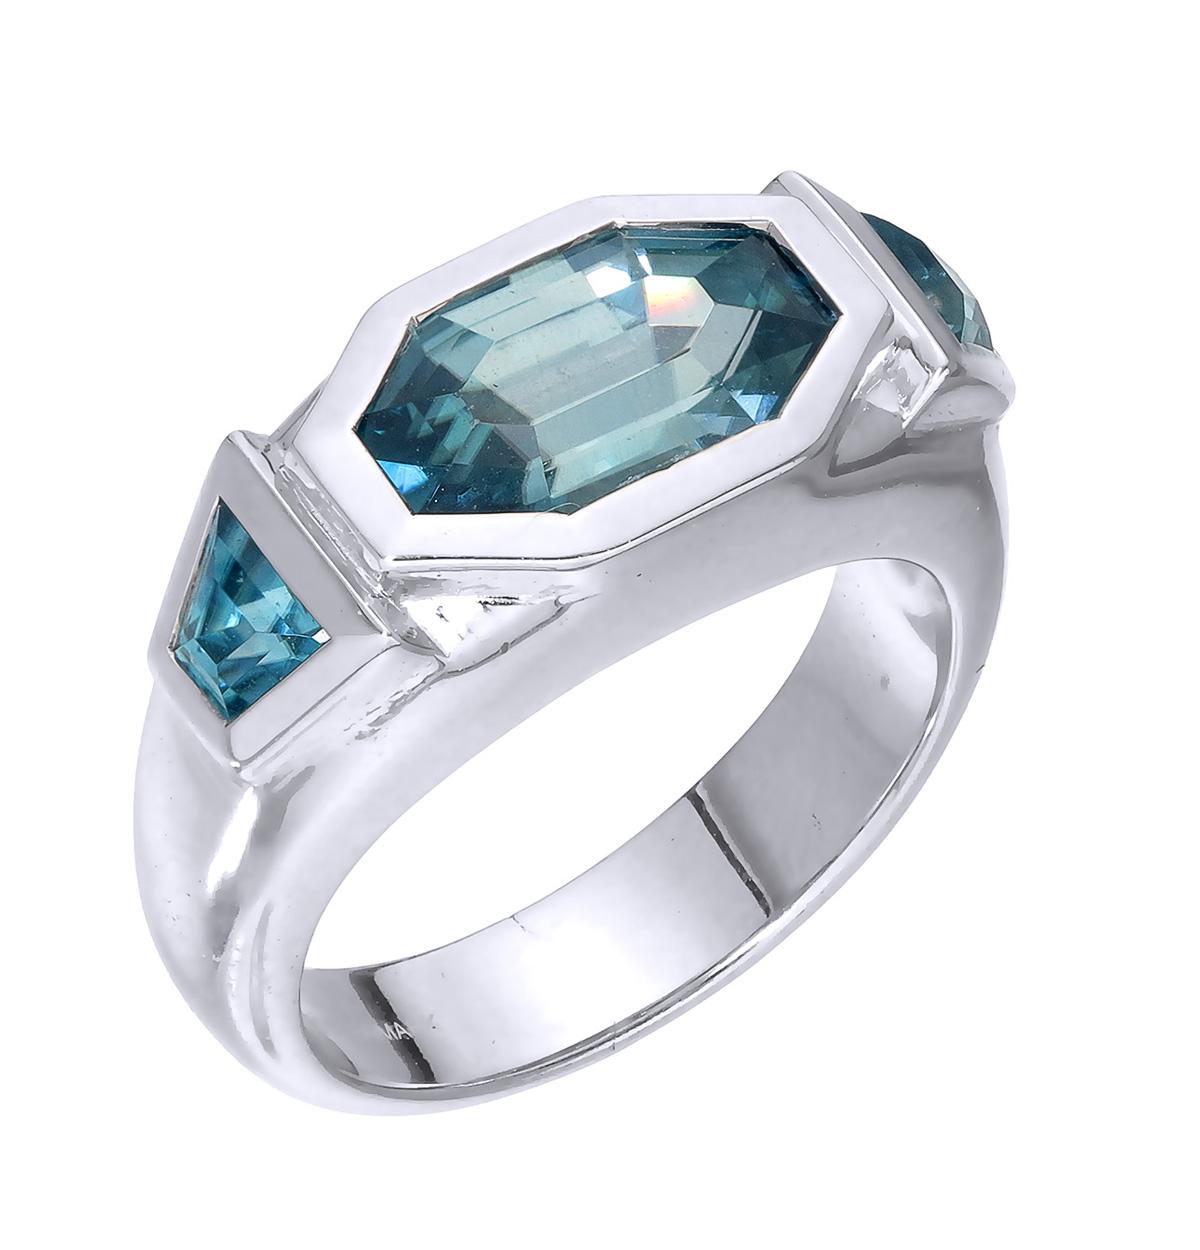 Orloff of Denmark; 925 Sterling Silver Ring set with three Natural Cambodian Blue Zircons totaling to 5.24 carats.

This piece has been meticulously hand-crafted out of 925 sterling silver.
In the center sits a 4.04 carat blue zircon mined, polished